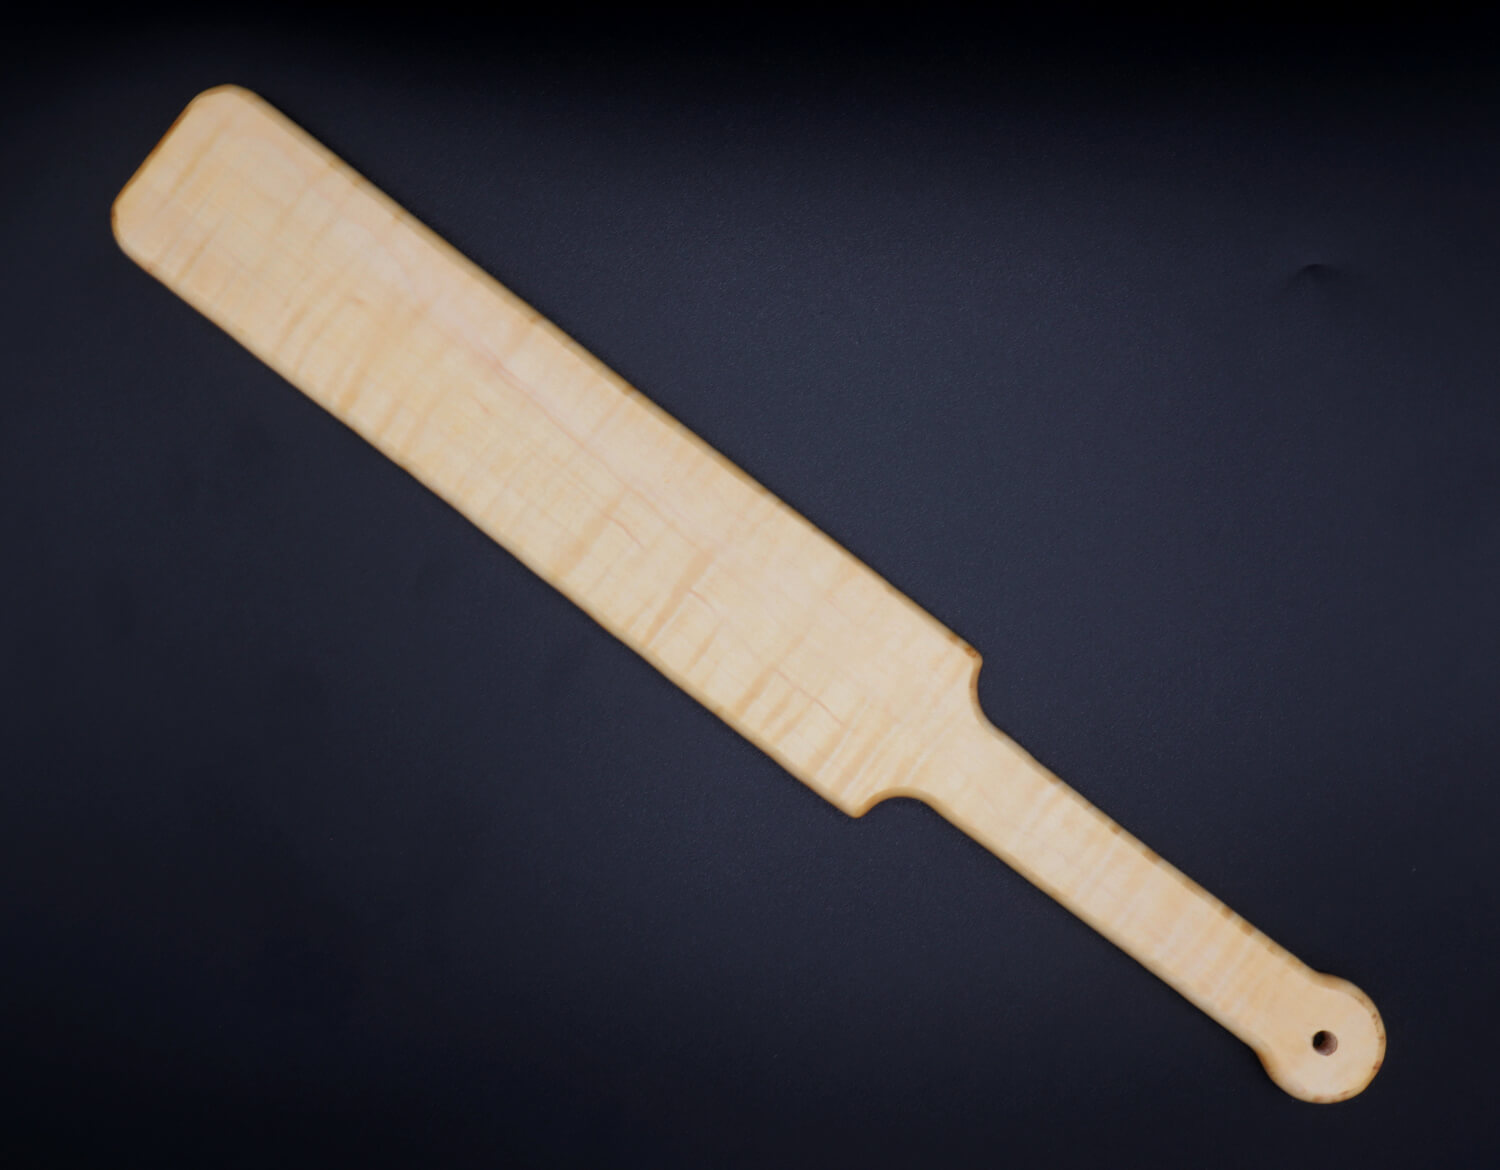 large wooden paddle made of curly maple over black background